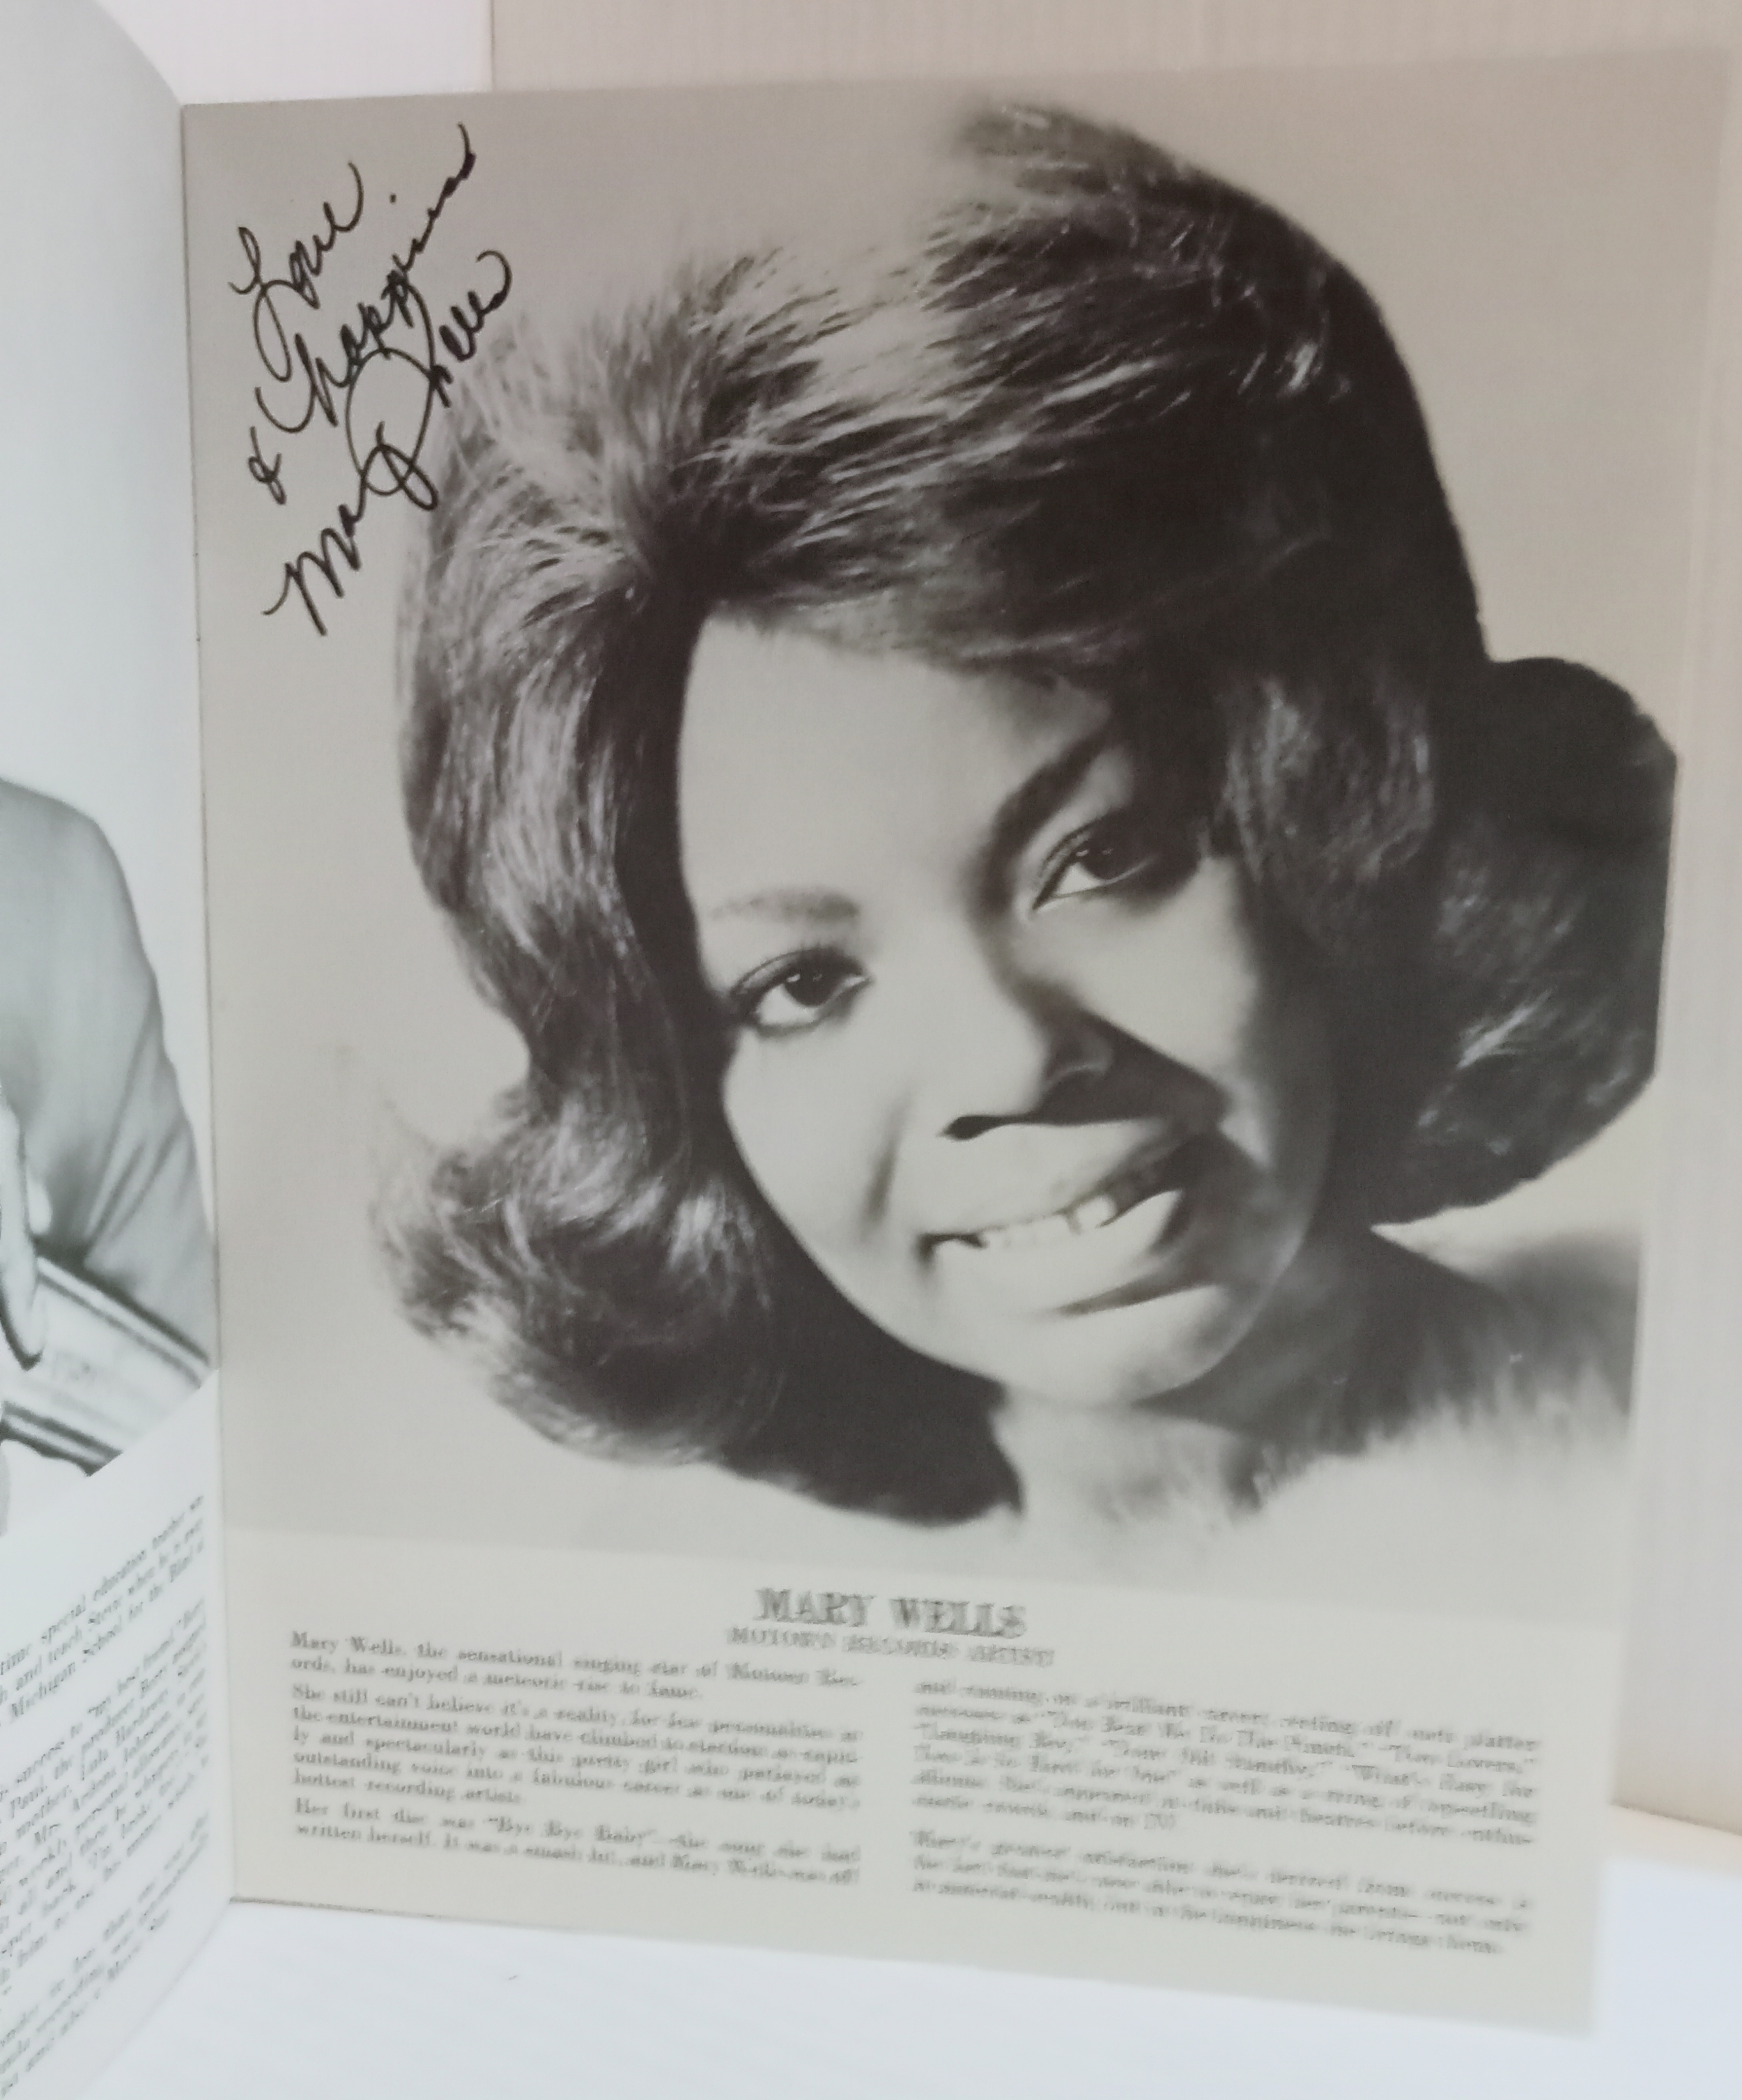 Original 60’s Motown Revue Tour Programme signed by various members of the groups featured in the - Image 2 of 5